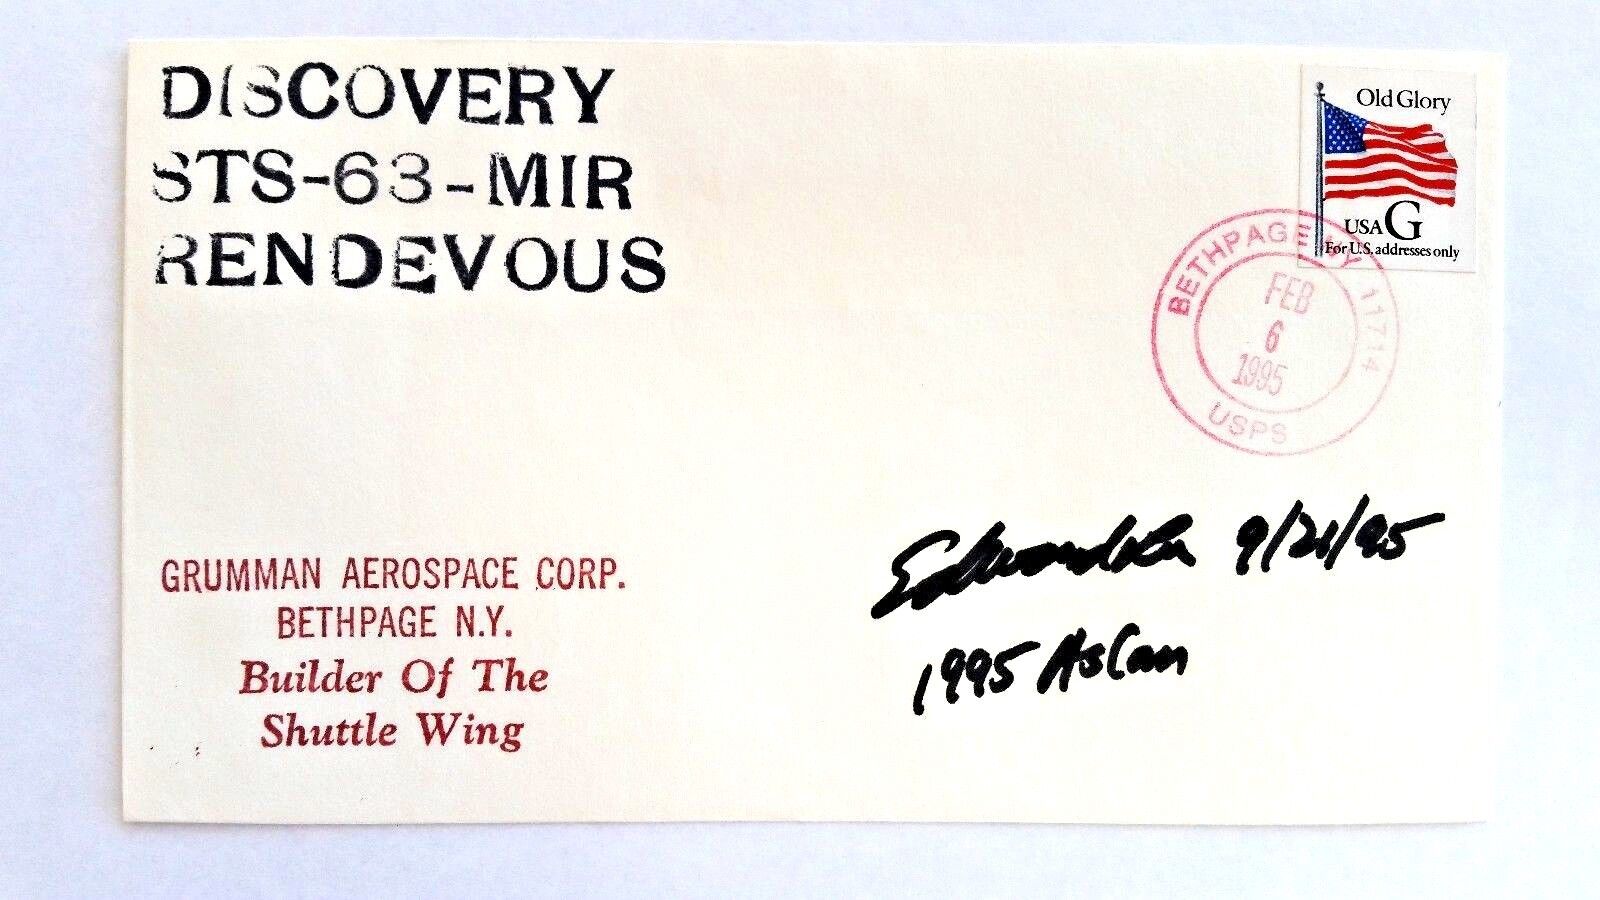 US ASTRONAUT Edward Tsang \'ED\' Lu signed DISCOVERY STS-63-MIR RENDEVOUS envelope